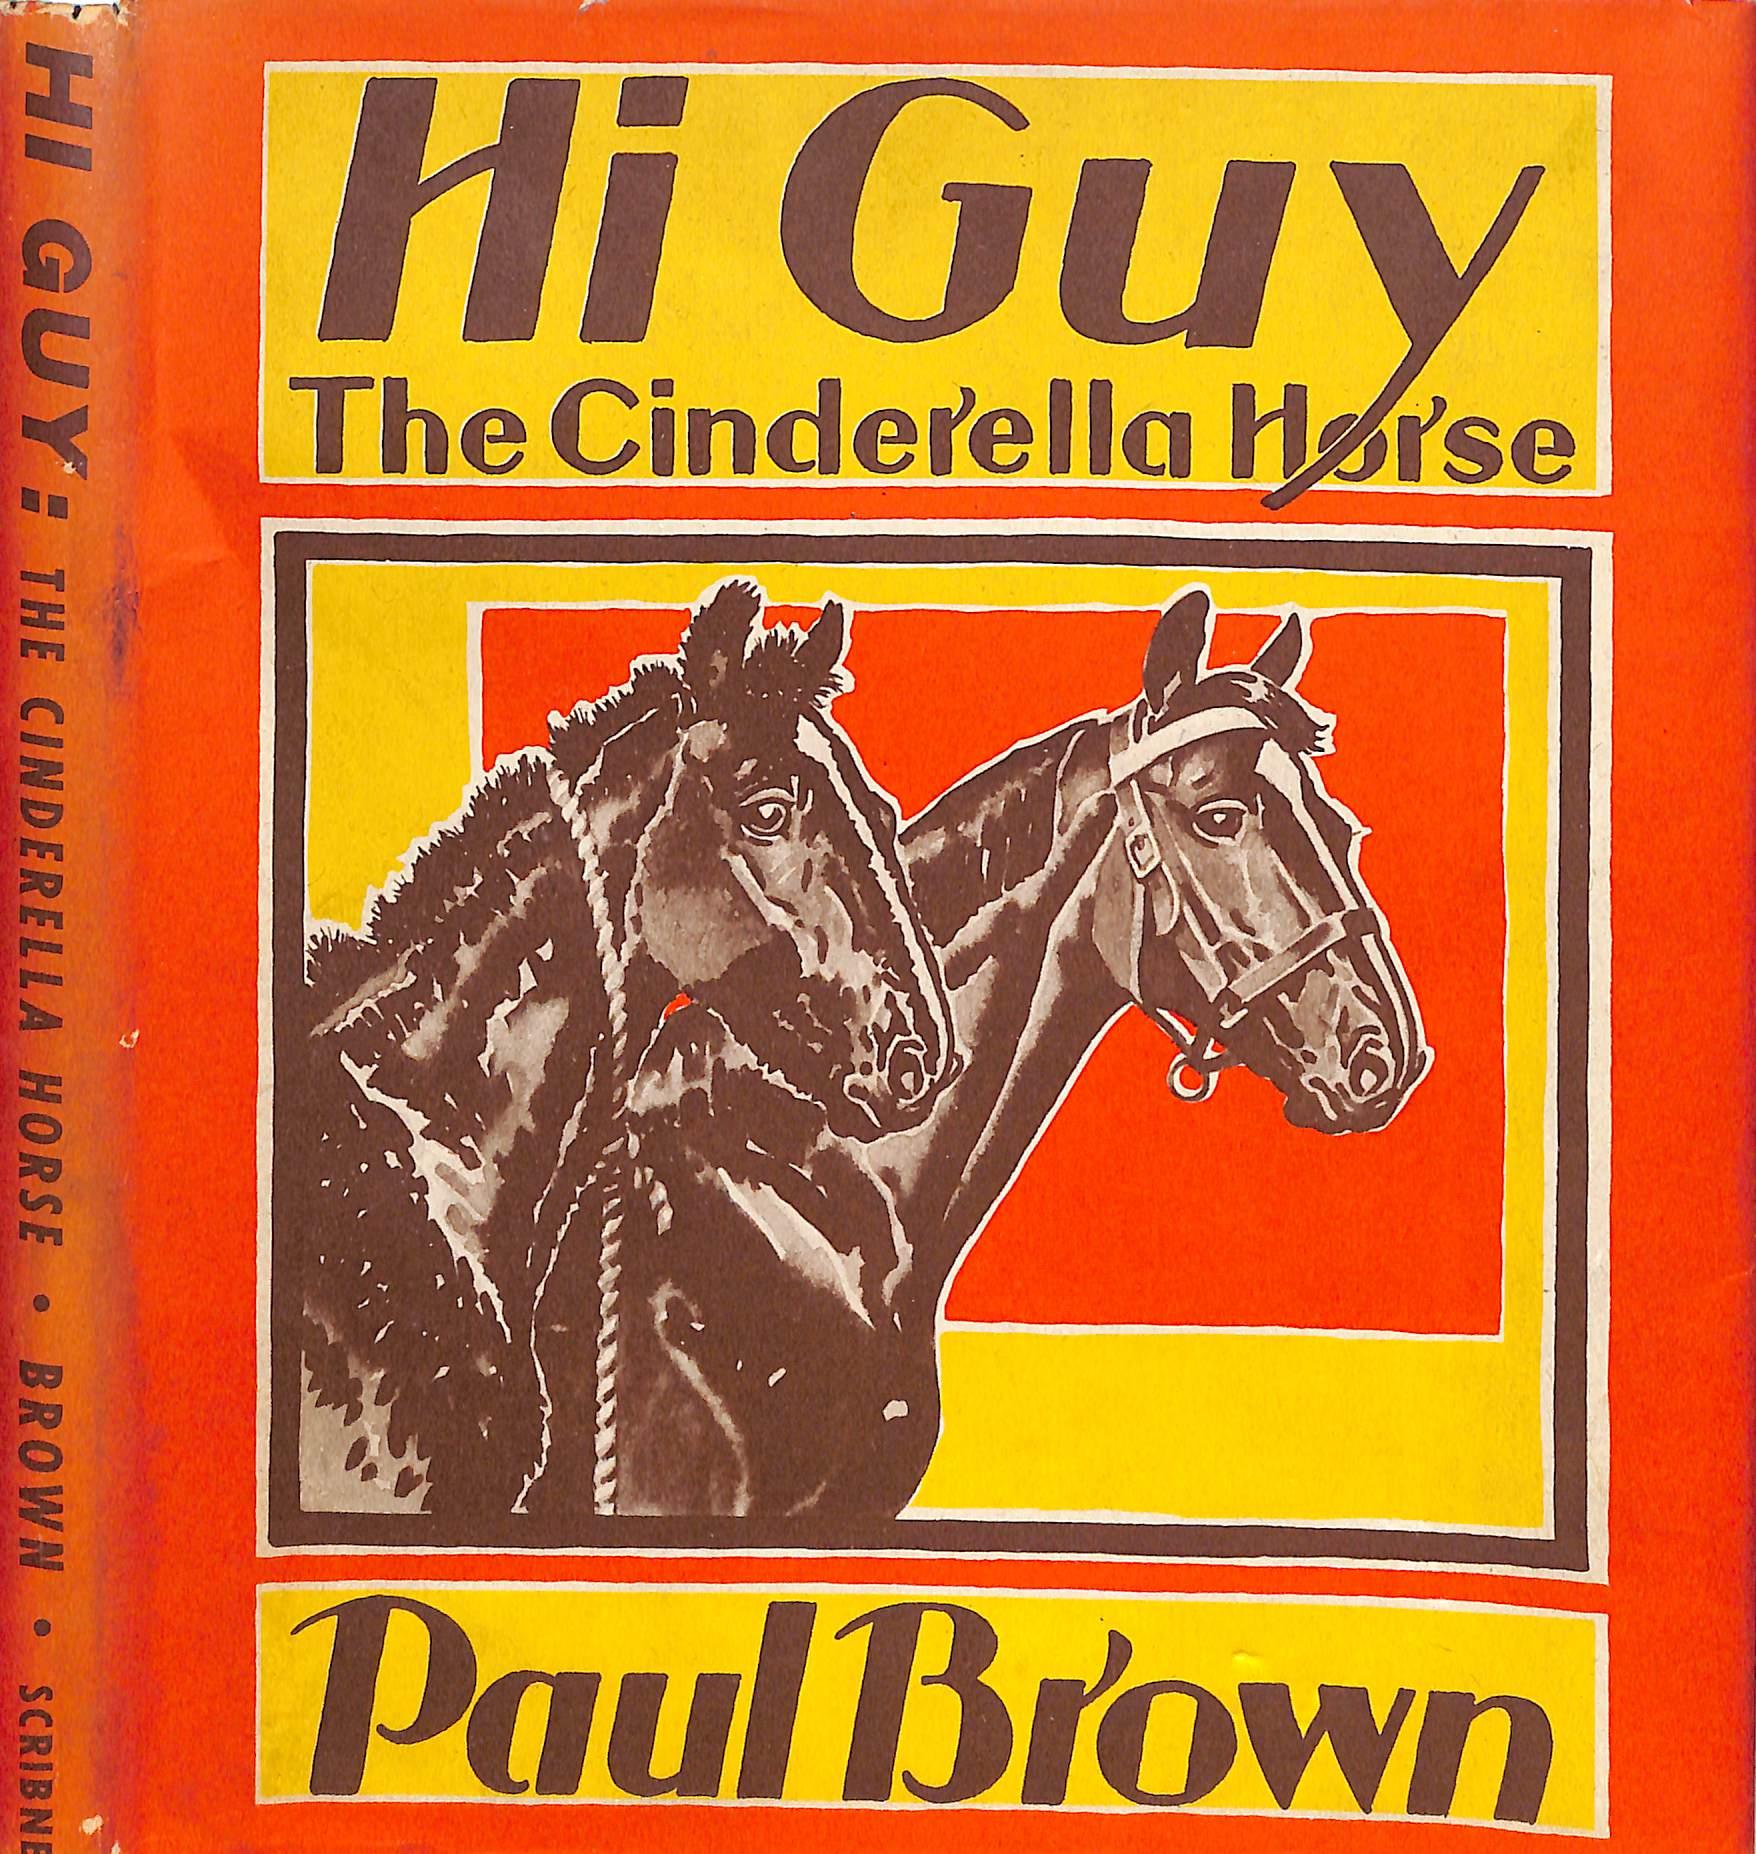 Original 1944 Pencil Drawing From Hi, Guy! The Cinderella Horse By Paul Brown 1 For Sale 4